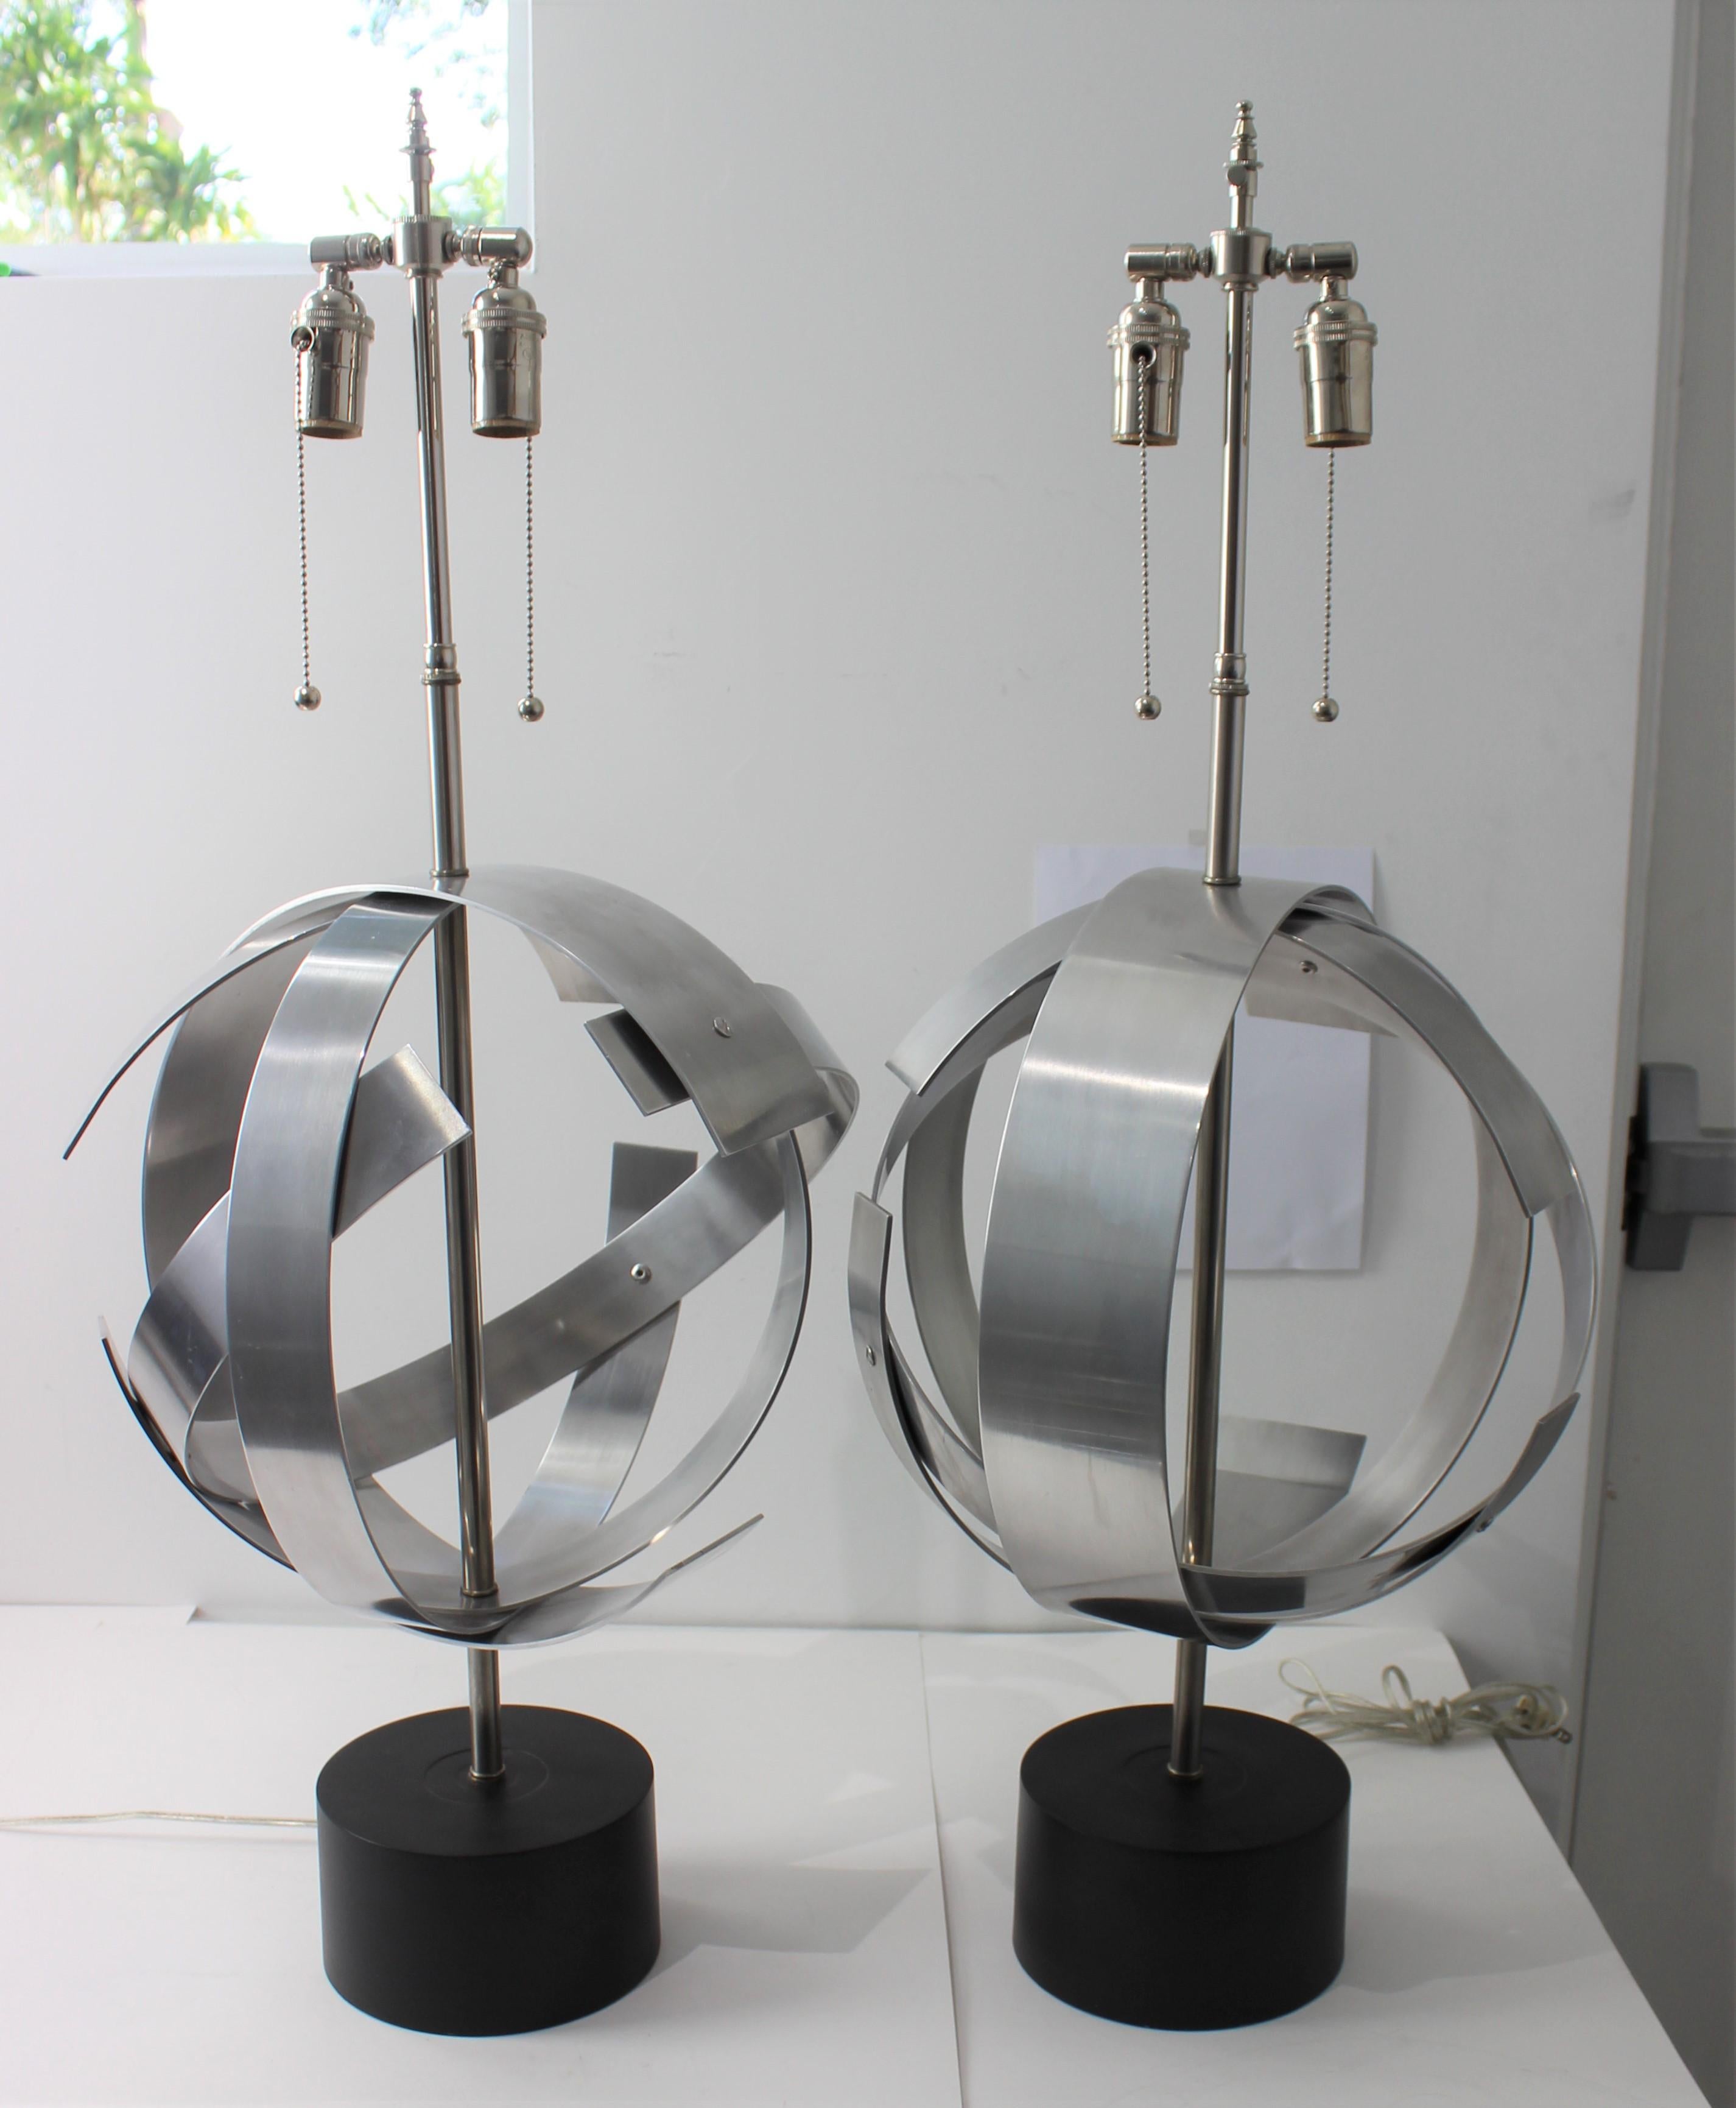 This pair of stylish and chic table lamps withl make a statement with the form and use of materials.  